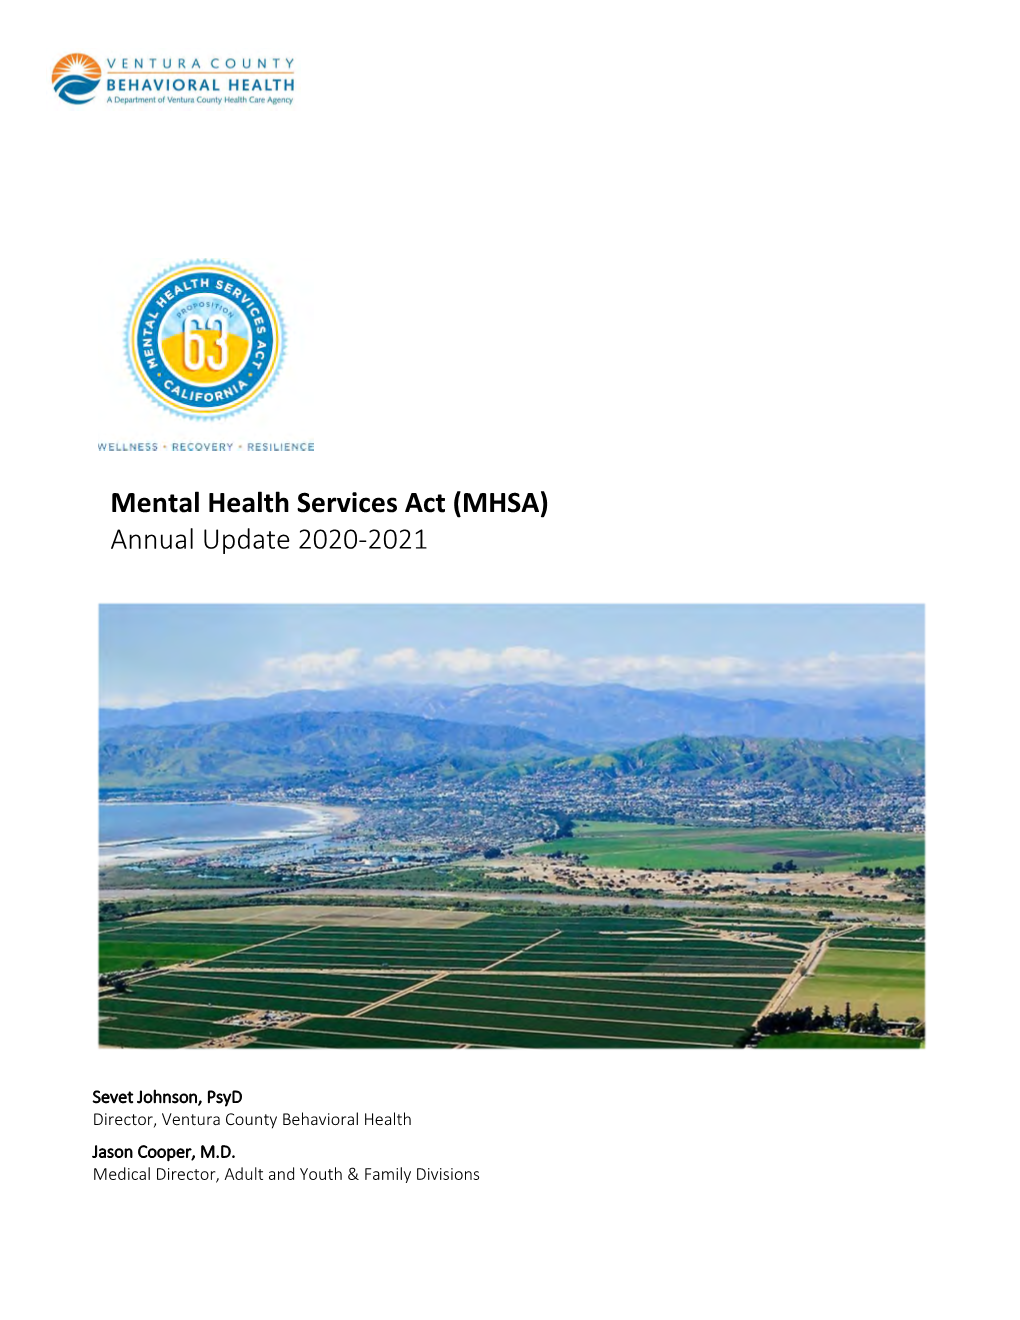 Mental Health Services Act (MHSA) Annual Update 2020-2021